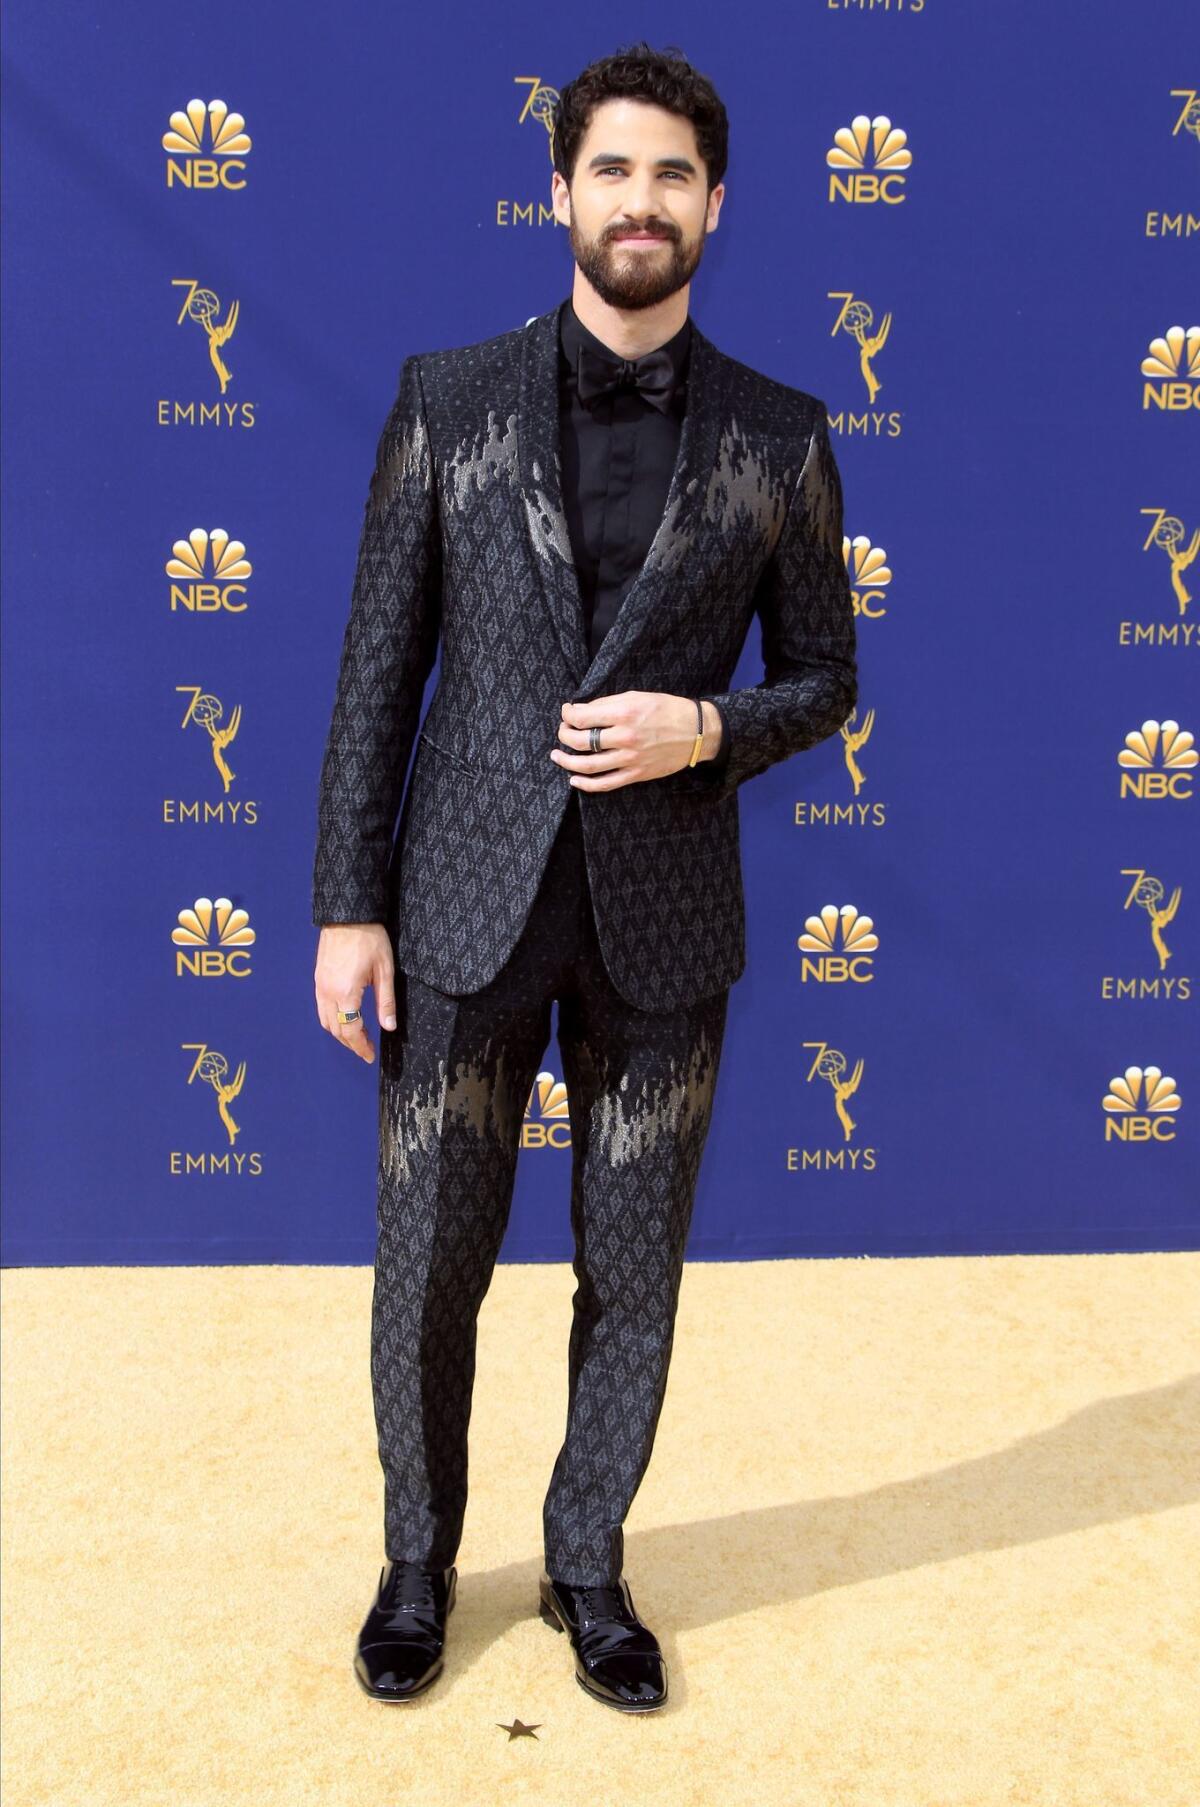 Darren Criss arrives for the 70th Primetime Emmy Awards wearing Emporio Armani.